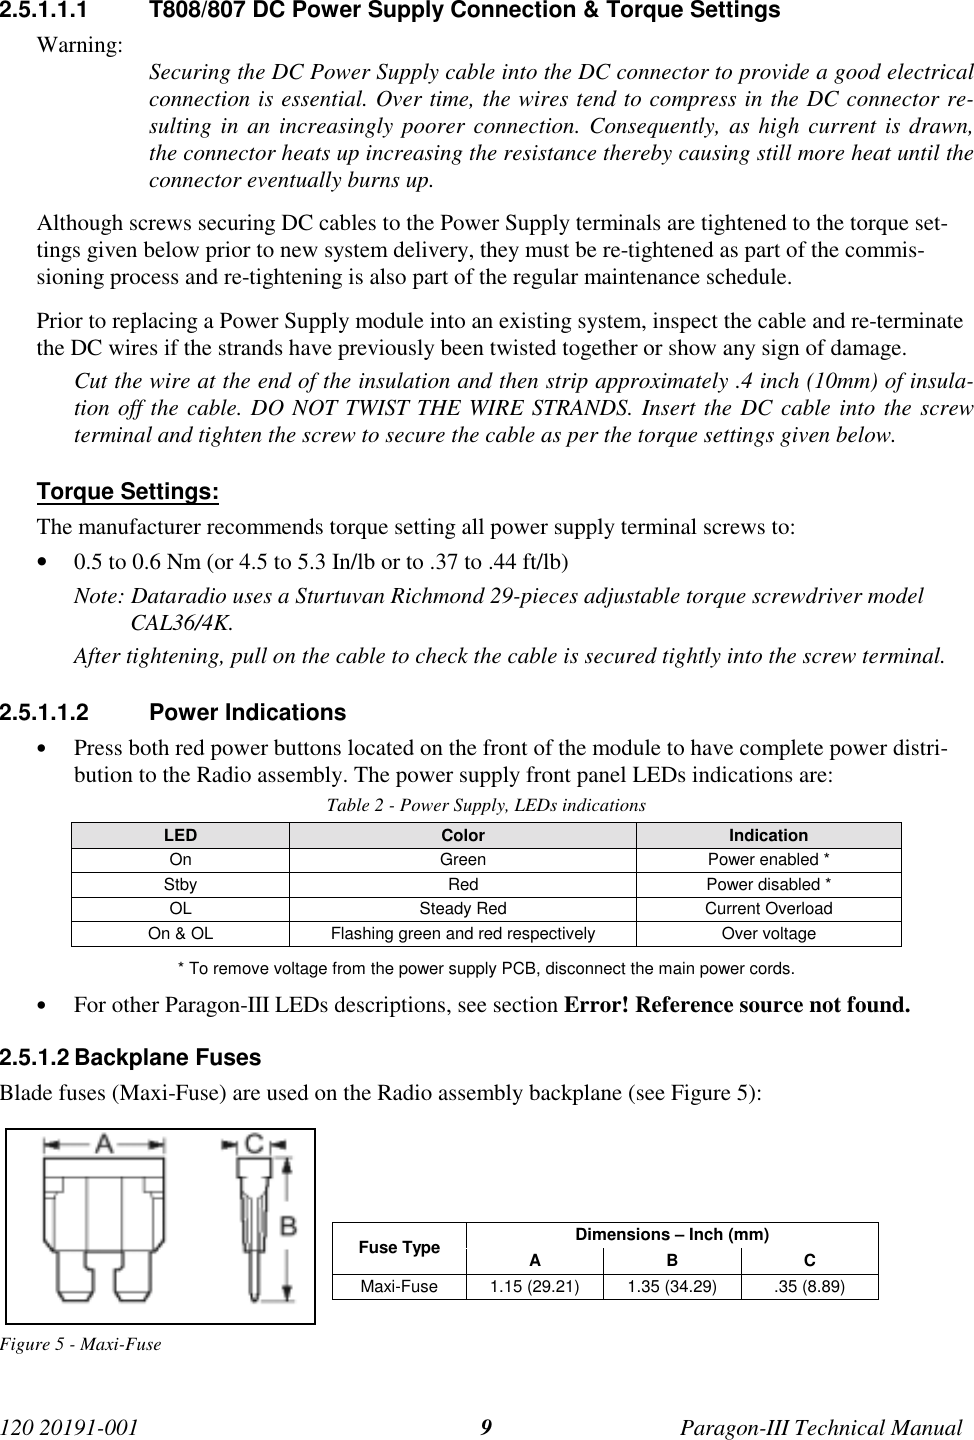 120 20191-001 Paragon-III Technical Manual92.5.1.1.1  T808/807 DC Power Supply Connection &amp; Torque SettingsWarning: Securing the DC Power Supply cable into the DC connector to provide a good electricalconnection is essential. Over time, the wires tend to compress in the DC connector re-sulting in an increasingly poorer connection. Consequently, as high current is drawn,the connector heats up increasing the resistance thereby causing still more heat until theconnector eventually burns up.Although screws securing DC cables to the Power Supply terminals are tightened to the torque set-tings given below prior to new system delivery, they must be re-tightened as part of the commis-sioning process and re-tightening is also part of the regular maintenance schedule.Prior to replacing a Power Supply module into an existing system, inspect the cable and re-terminatethe DC wires if the strands have previously been twisted together or show any sign of damage.Cut the wire at the end of the insulation and then strip approximately .4 inch (10mm) of insula-tion off the cable. DO NOT TWIST THE WIRE STRANDS. Insert the DC cable into the screwterminal and tighten the screw to secure the cable as per the torque settings given below.Torque Settings:The manufacturer recommends torque setting all power supply terminal screws to:• 0.5 to 0.6 Nm (or 4.5 to 5.3 In/lb or to .37 to .44 ft/lb)Note: Dataradio uses a Sturtuvan Richmond 29-pieces adjustable torque screwdriver modelCAL36/4K.After tightening, pull on the cable to check the cable is secured tightly into the screw terminal.2.5.1.1.2 Power Indications• Press both red power buttons located on the front of the module to have complete power distri-bution to the Radio assembly. The power supply front panel LEDs indications are:Table 2 - Power Supply, LEDs indicationsLED Color IndicationOn Green Power enabled *Stby Red Power disabled *OL Steady Red Current OverloadOn &amp; OL Flashing green and red respectively Over voltage* To remove voltage from the power supply PCB, disconnect the main power cords.• For other Paragon-III LEDs descriptions, see section Error! Reference source not found.2.5.1.2 Backplane FusesBlade fuses (Maxi-Fuse) are used on the Radio assembly backplane (see Figure 5):Dimensions – Inch (mm)Fuse Type ABCMaxi-Fuse 1.15 (29.21) 1.35 (34.29) .35 (8.89)Figure 5 - Maxi-Fuse